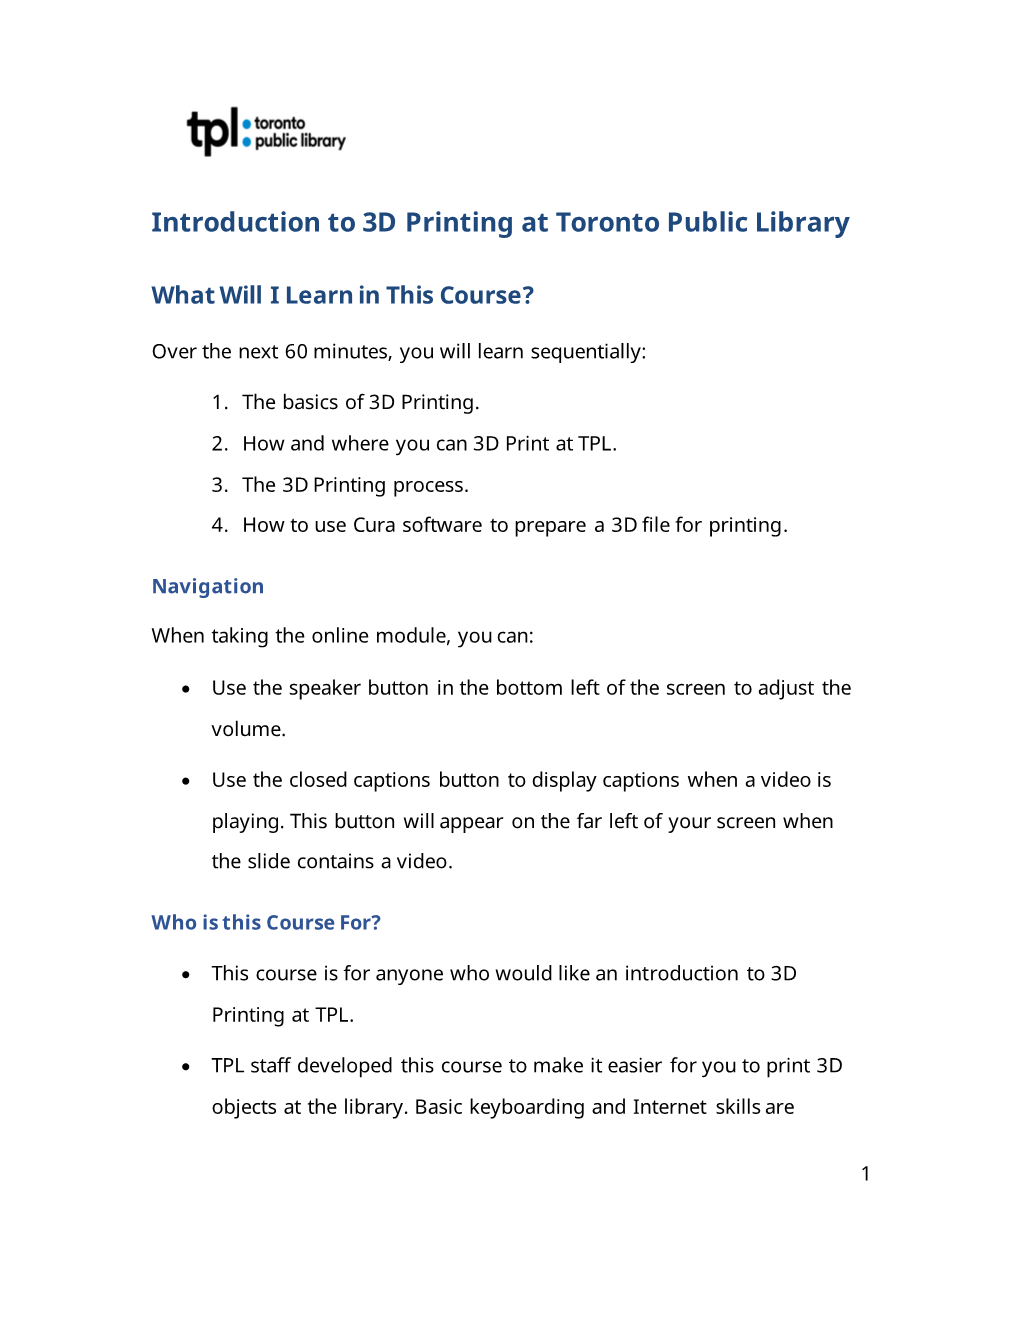 Introduction to 3D Printing at Toronto Public Library